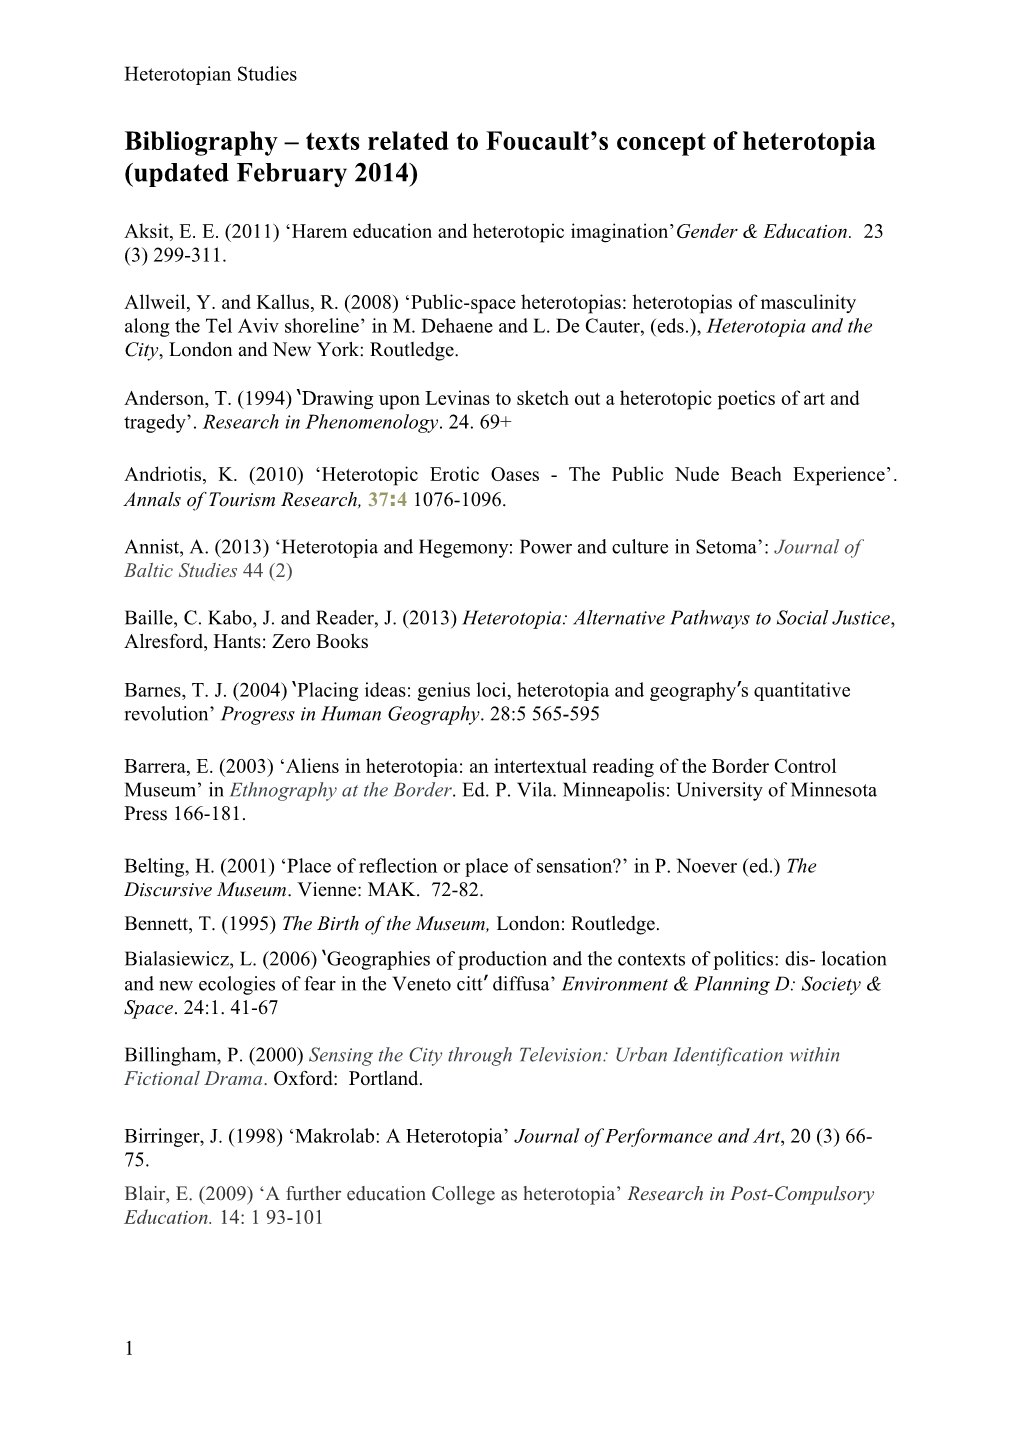 Bibliography Texts Related to Foucault S Concept of Heterotopia (Updated February 2014)